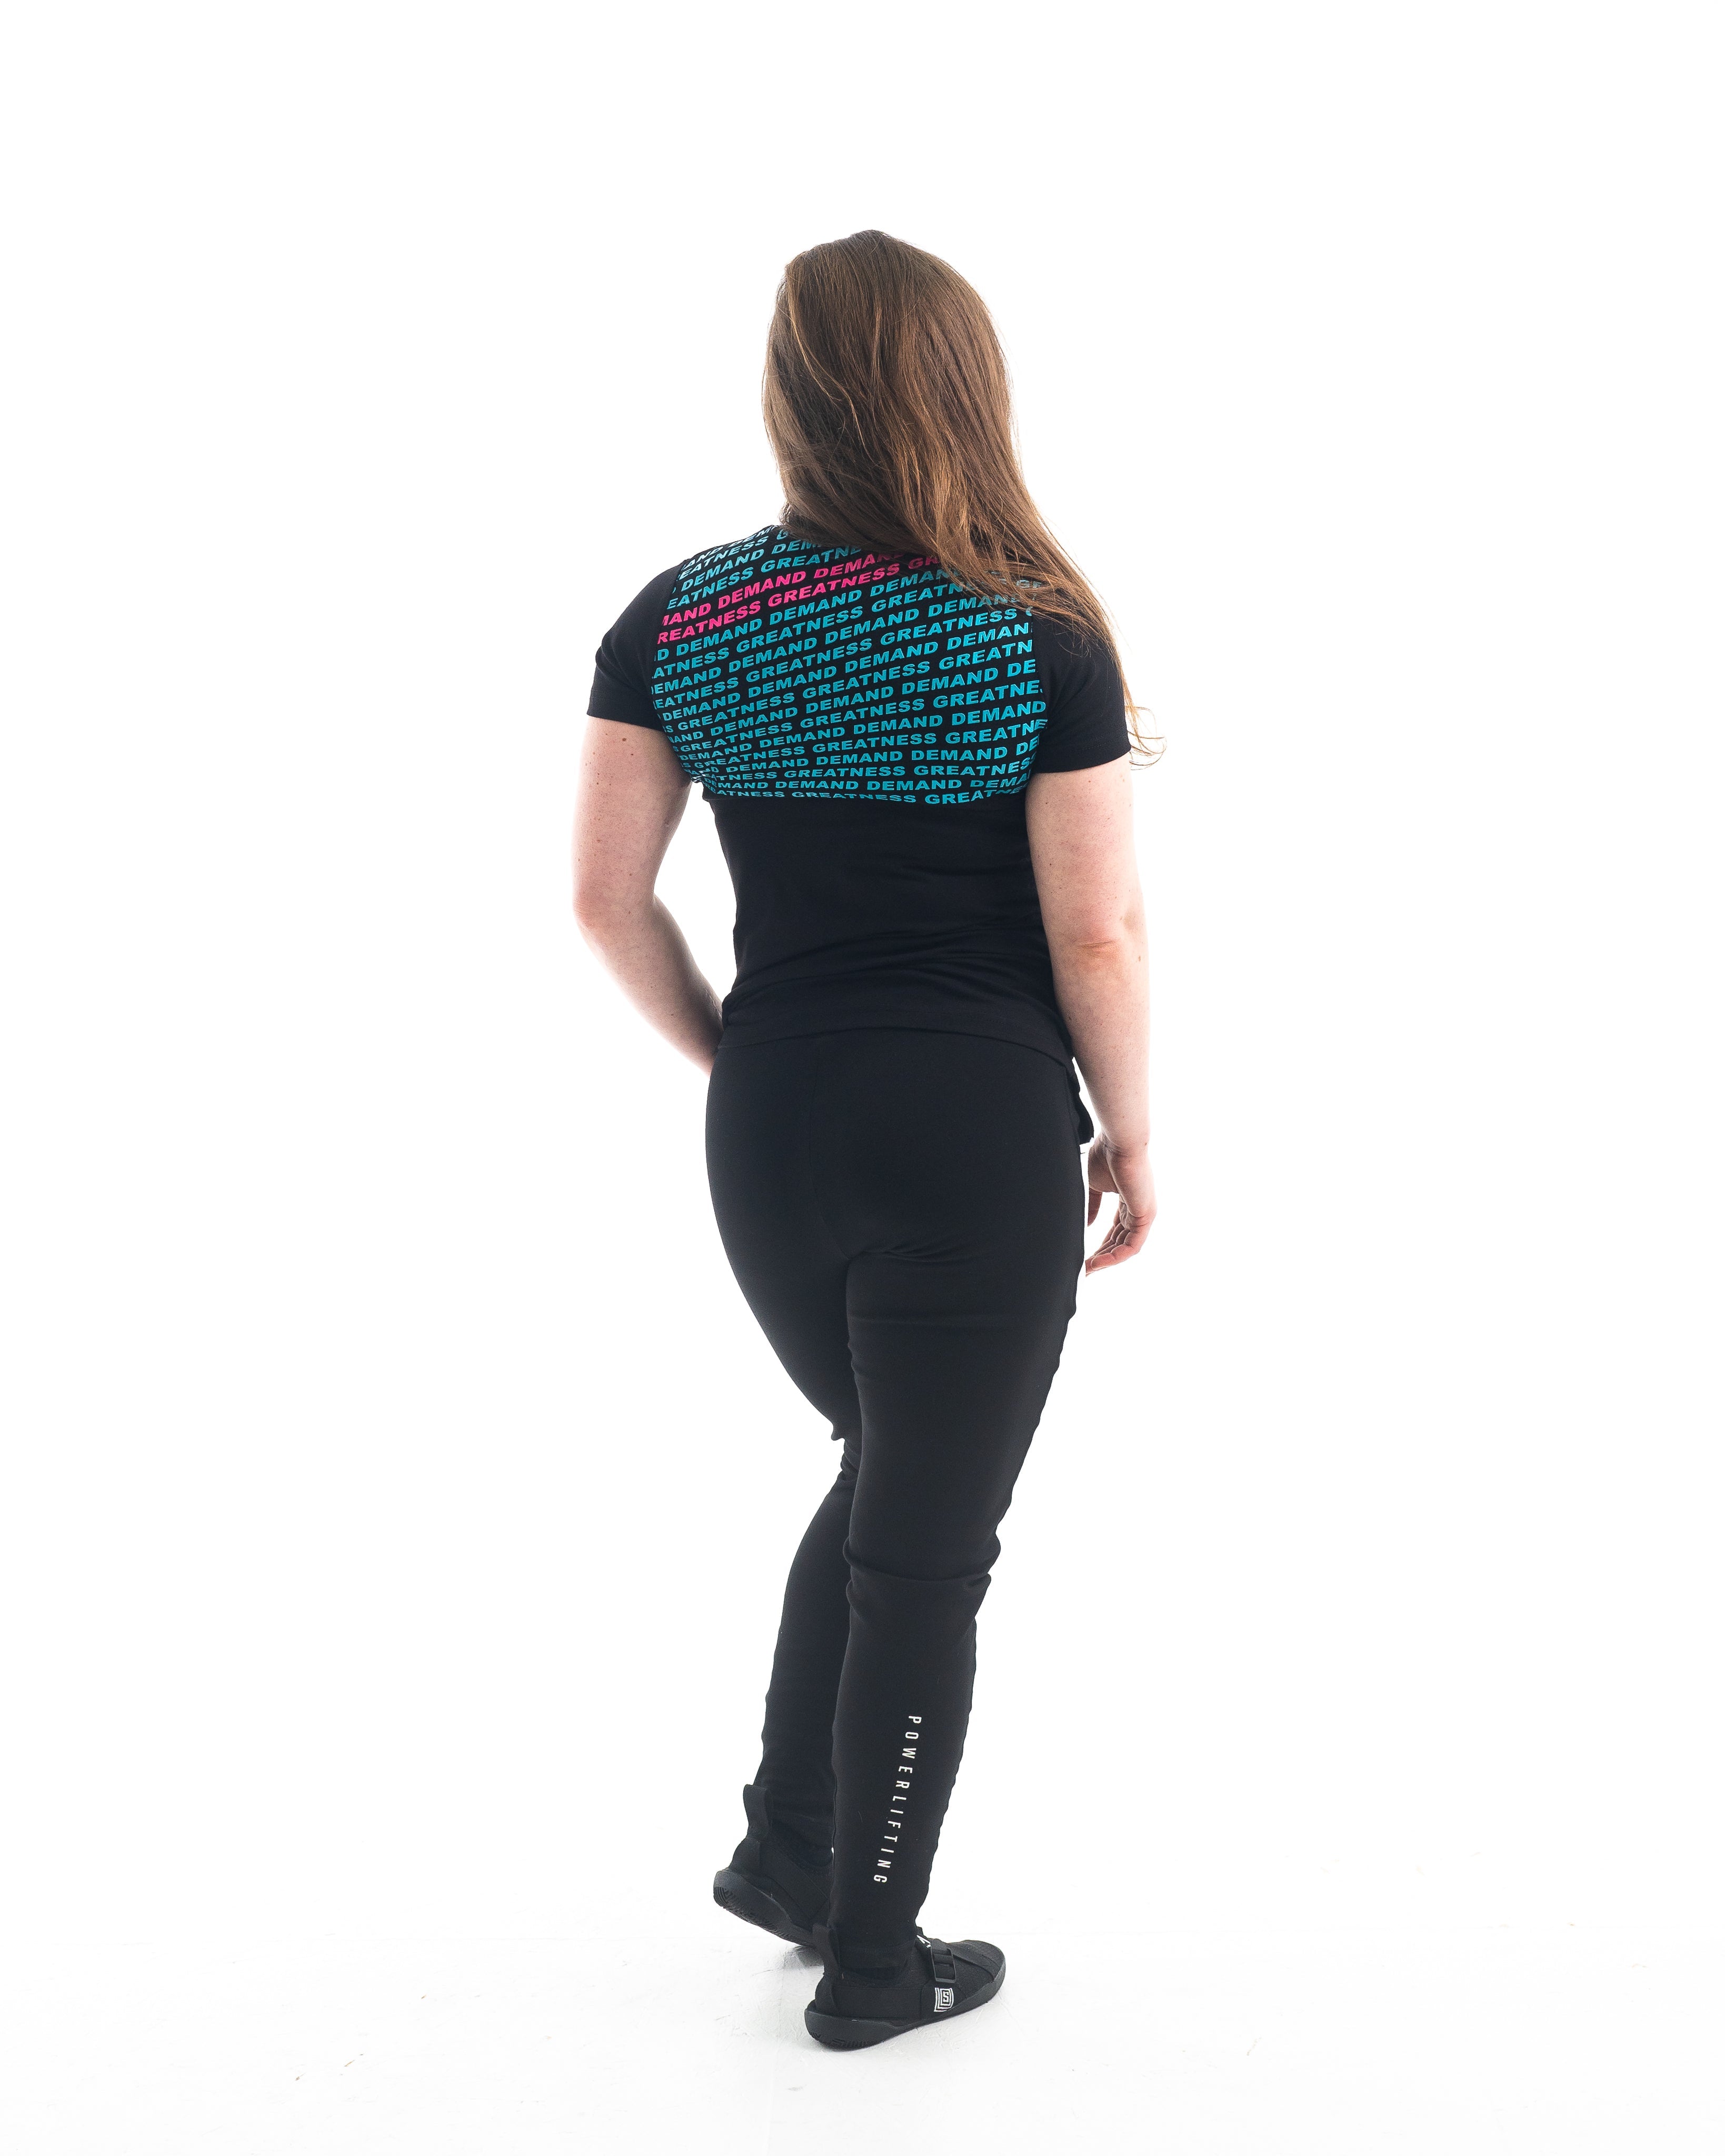 VorText Flamingo Women's Bar Grip Shirt. Make a stand on the platform as you continue to approach perfection to prove you are not of this world. Whether pressing, pulling, squatting or any other variational movement the knurling is always there. The silicone bar grip helps with slippery commercial benches and bars and anchors the barbell to your back. All A7 Powerlifting Equipment shipping to UK, Norway, Switzerland and Iceland.